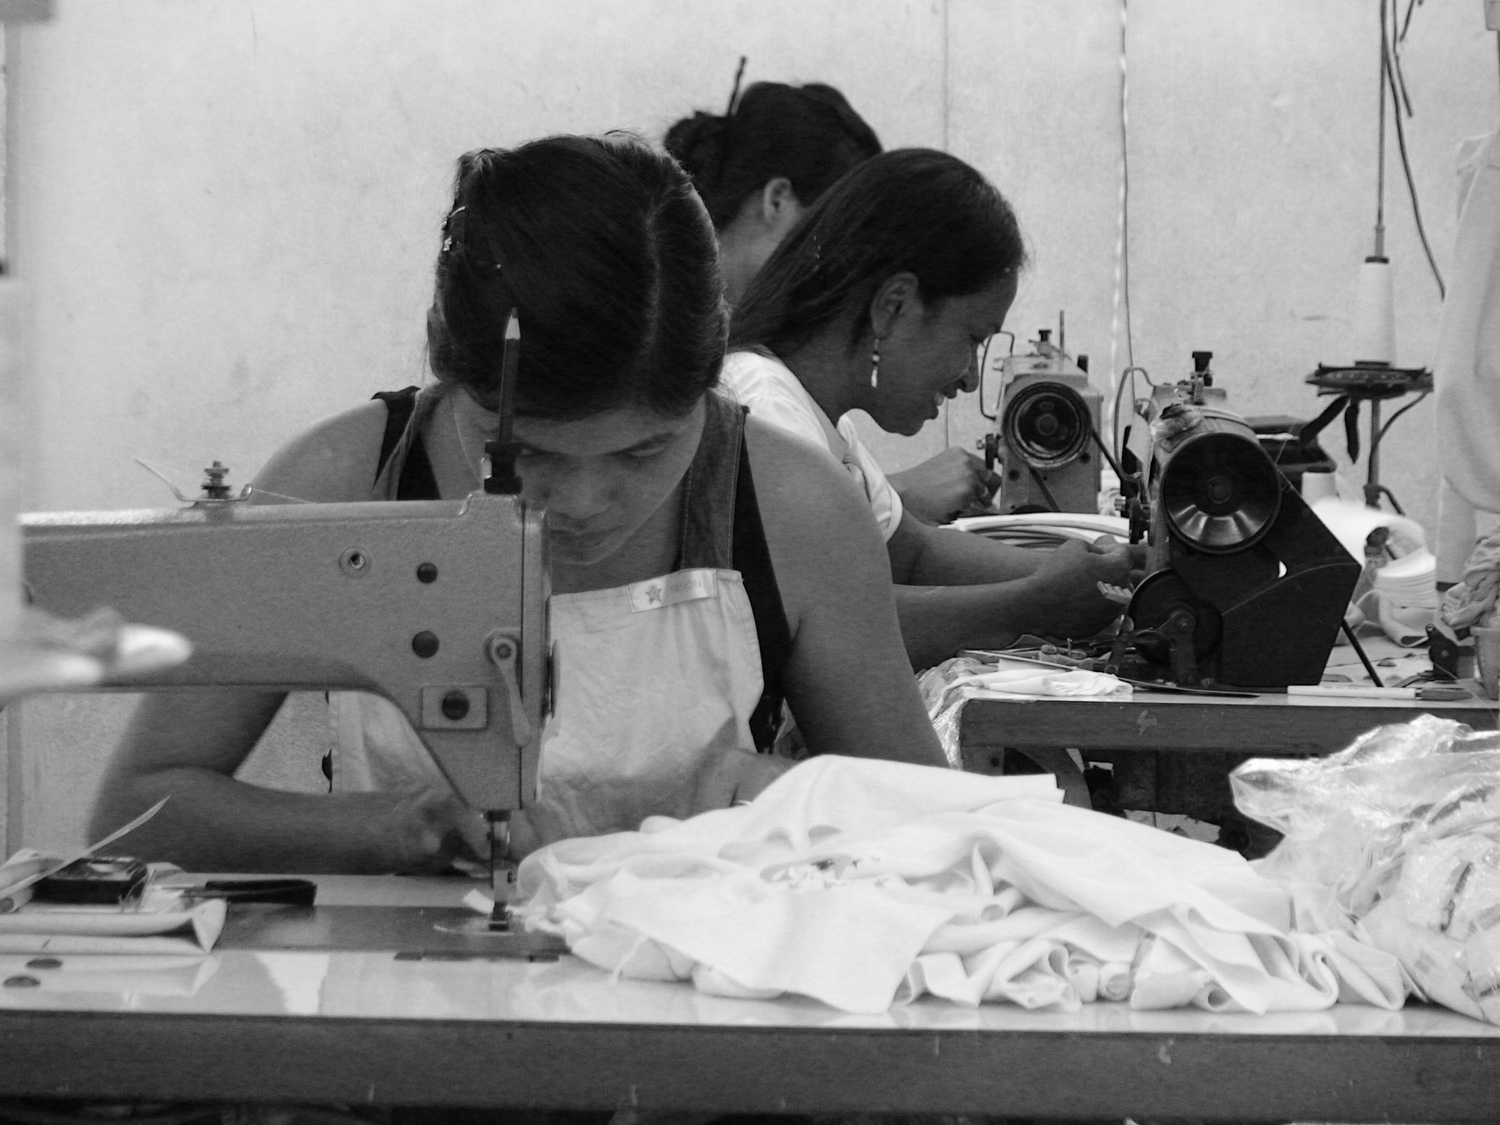 Kanjana was sewing polo t-shirts for her factory